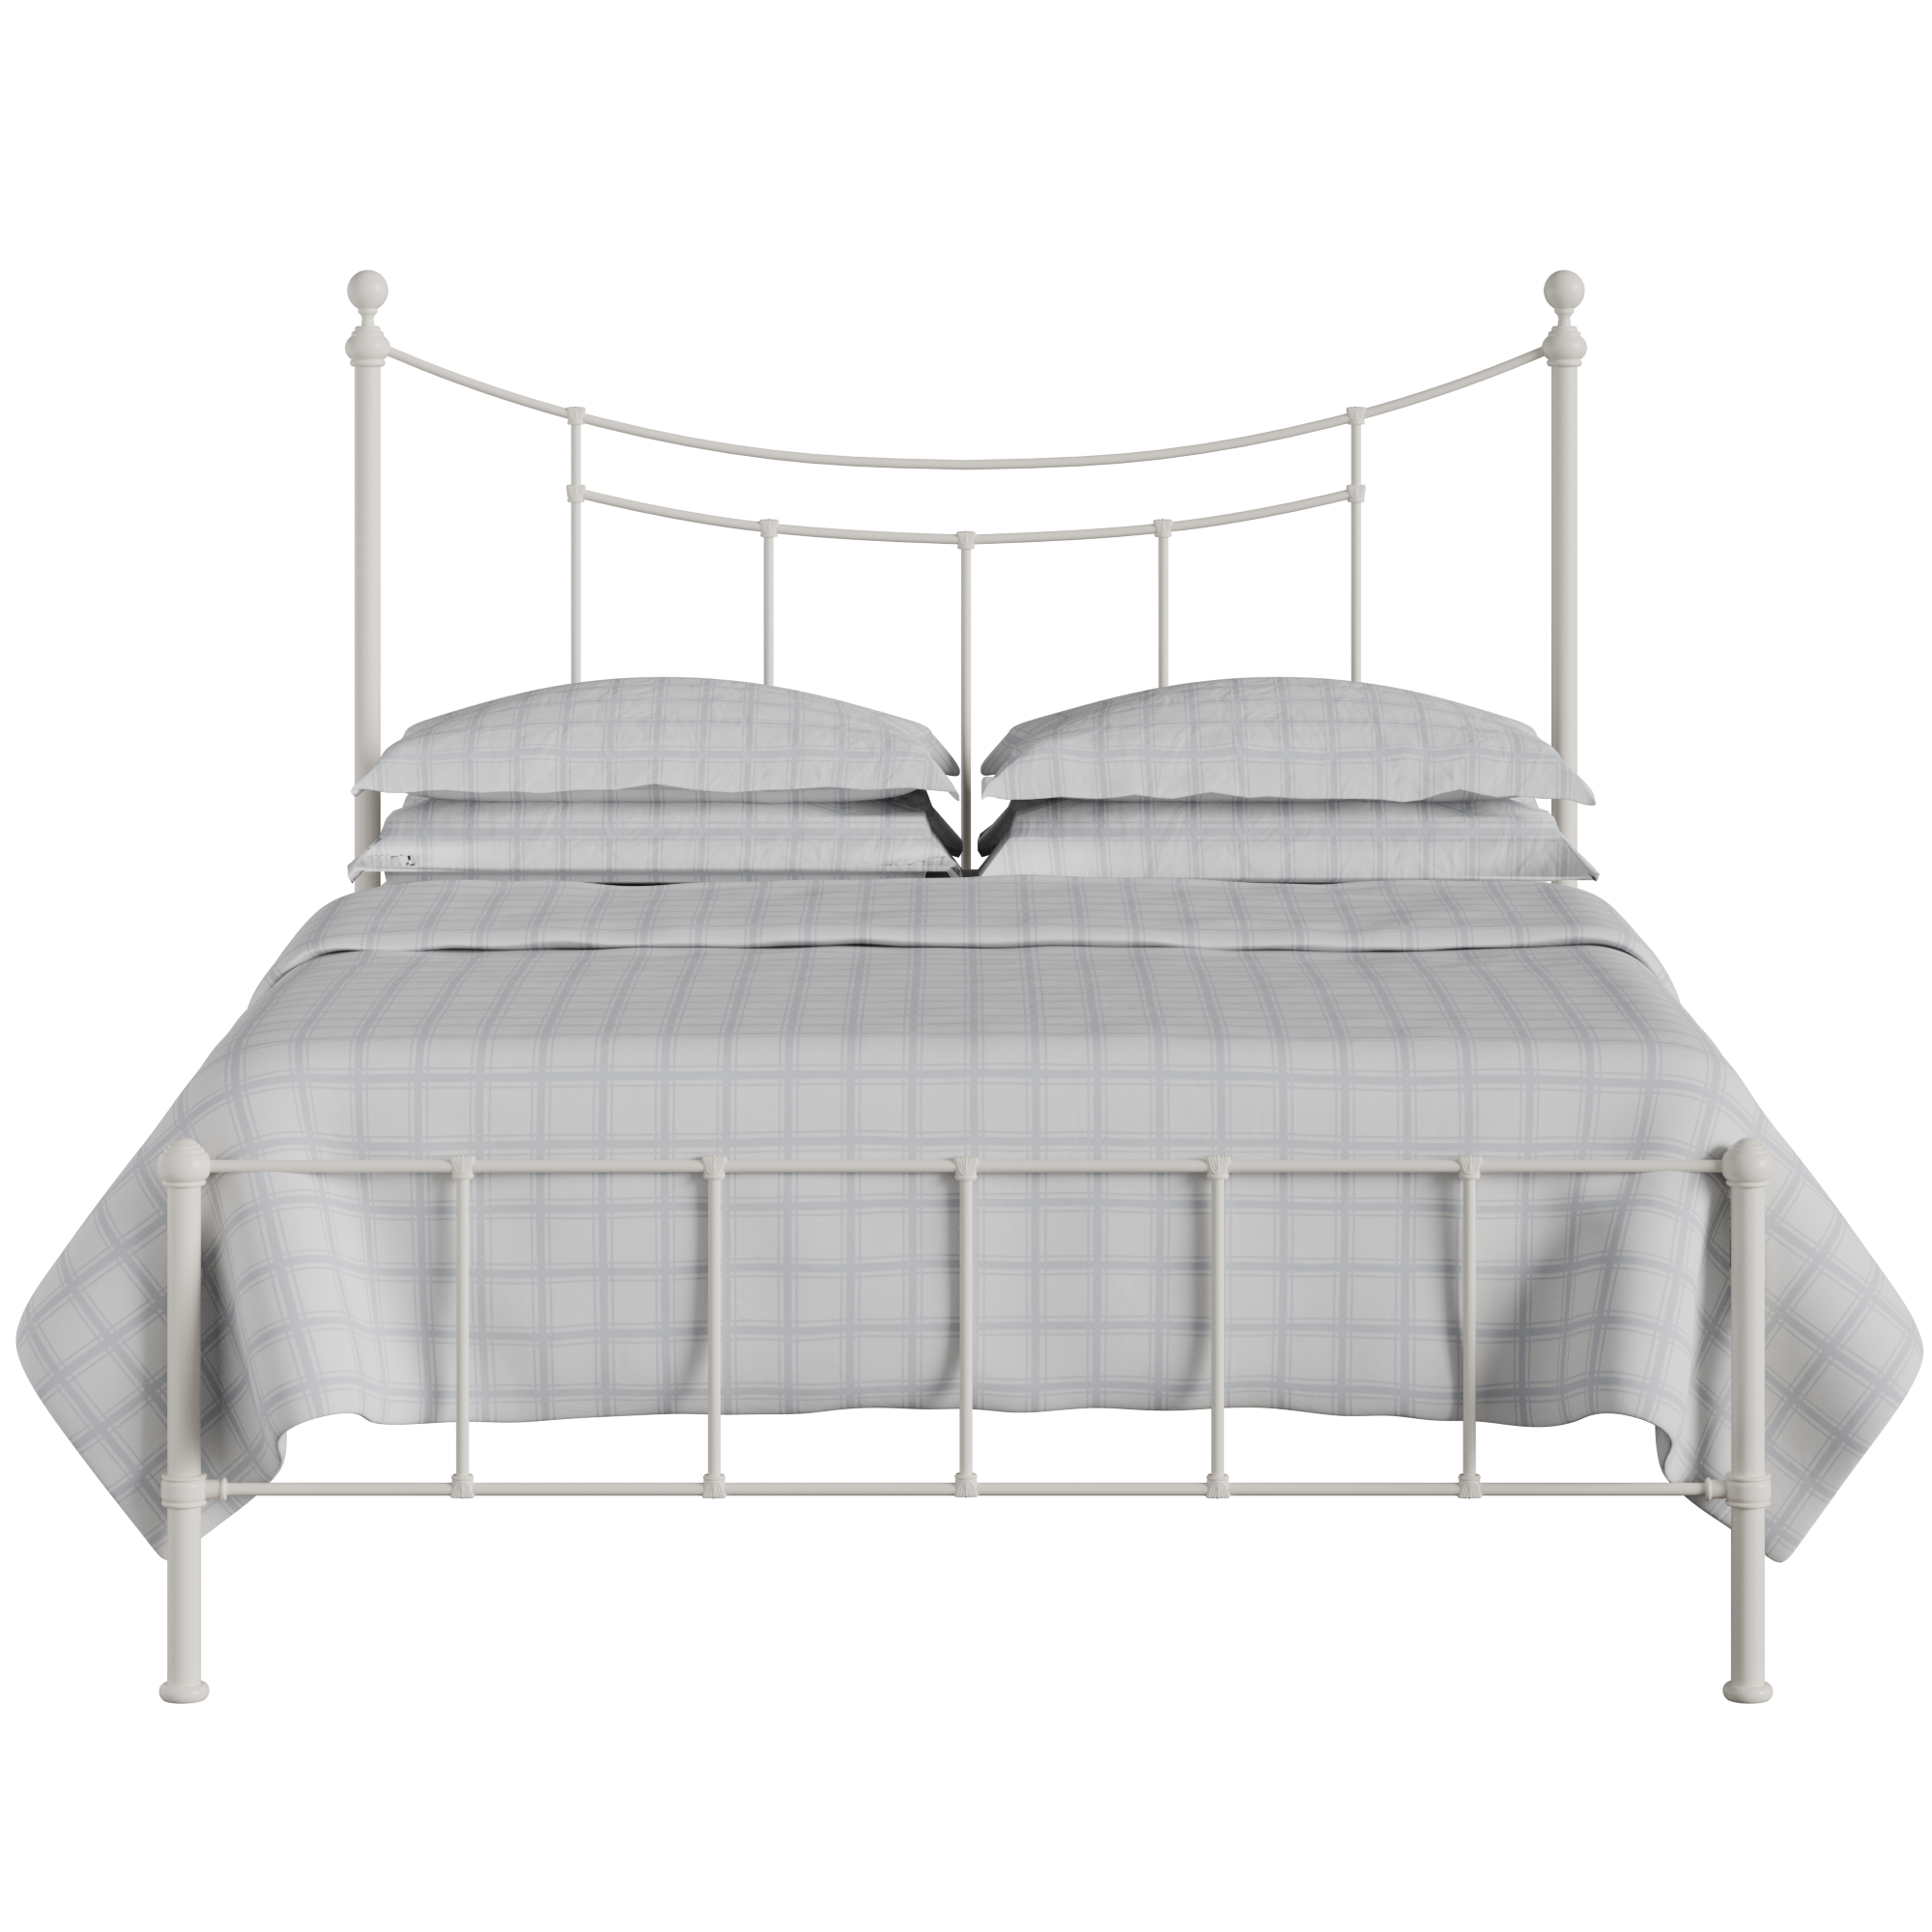 Isabelle iron/metal bed in ivory